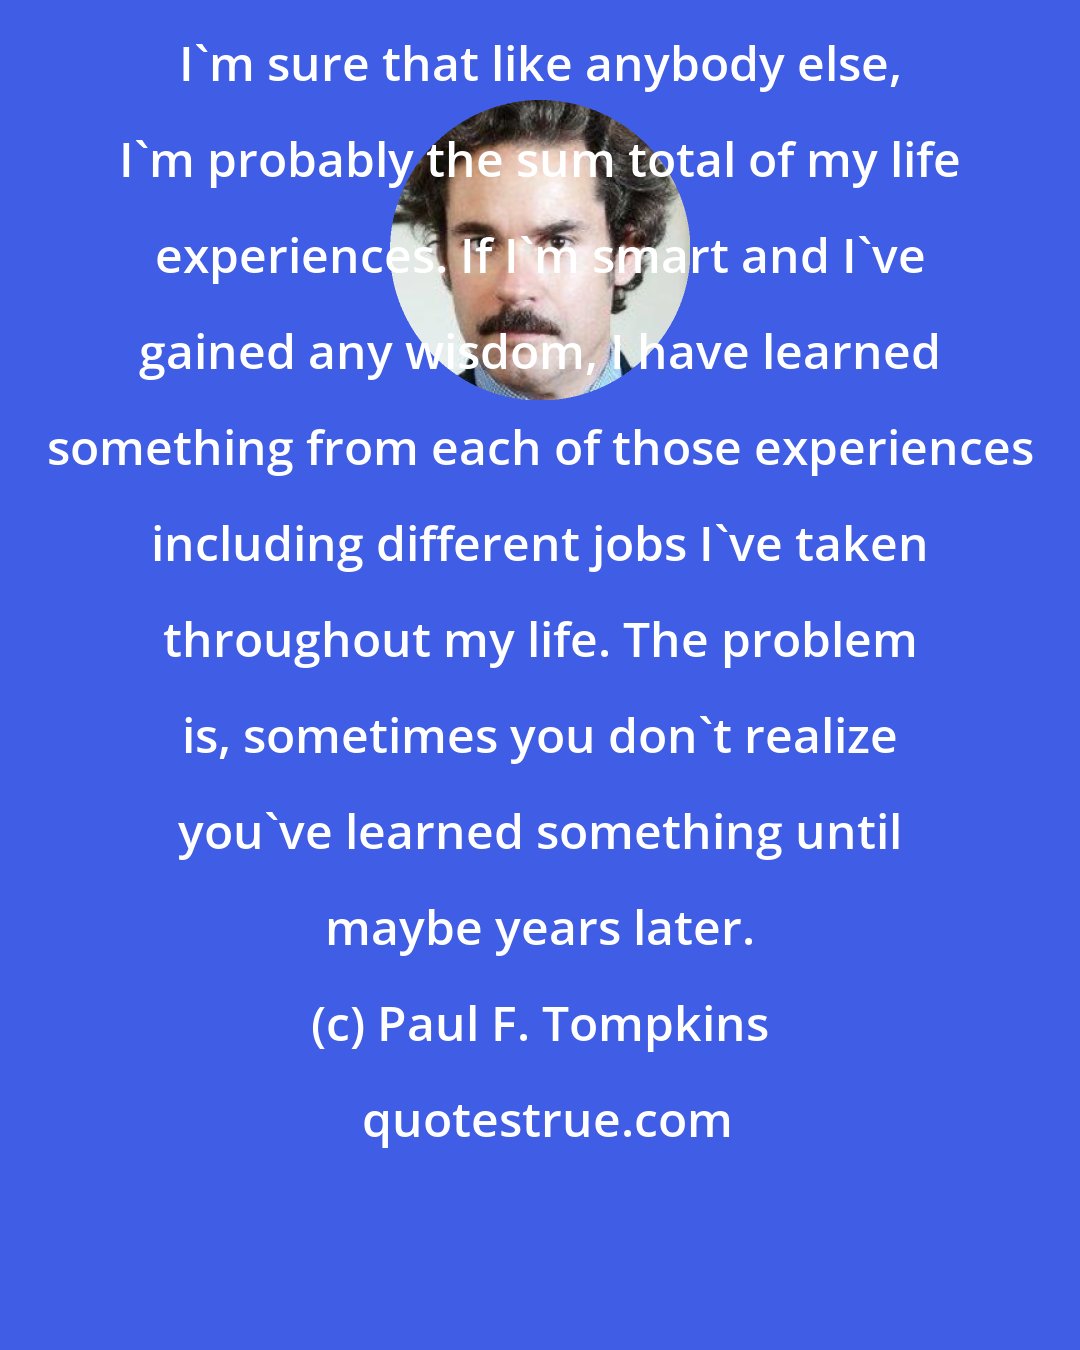 Paul F. Tompkins: I'm sure that like anybody else, I'm probably the sum total of my life experiences. If I'm smart and I've gained any wisdom, I have learned something from each of those experiences including different jobs I've taken throughout my life. The problem is, sometimes you don't realize you've learned something until maybe years later.